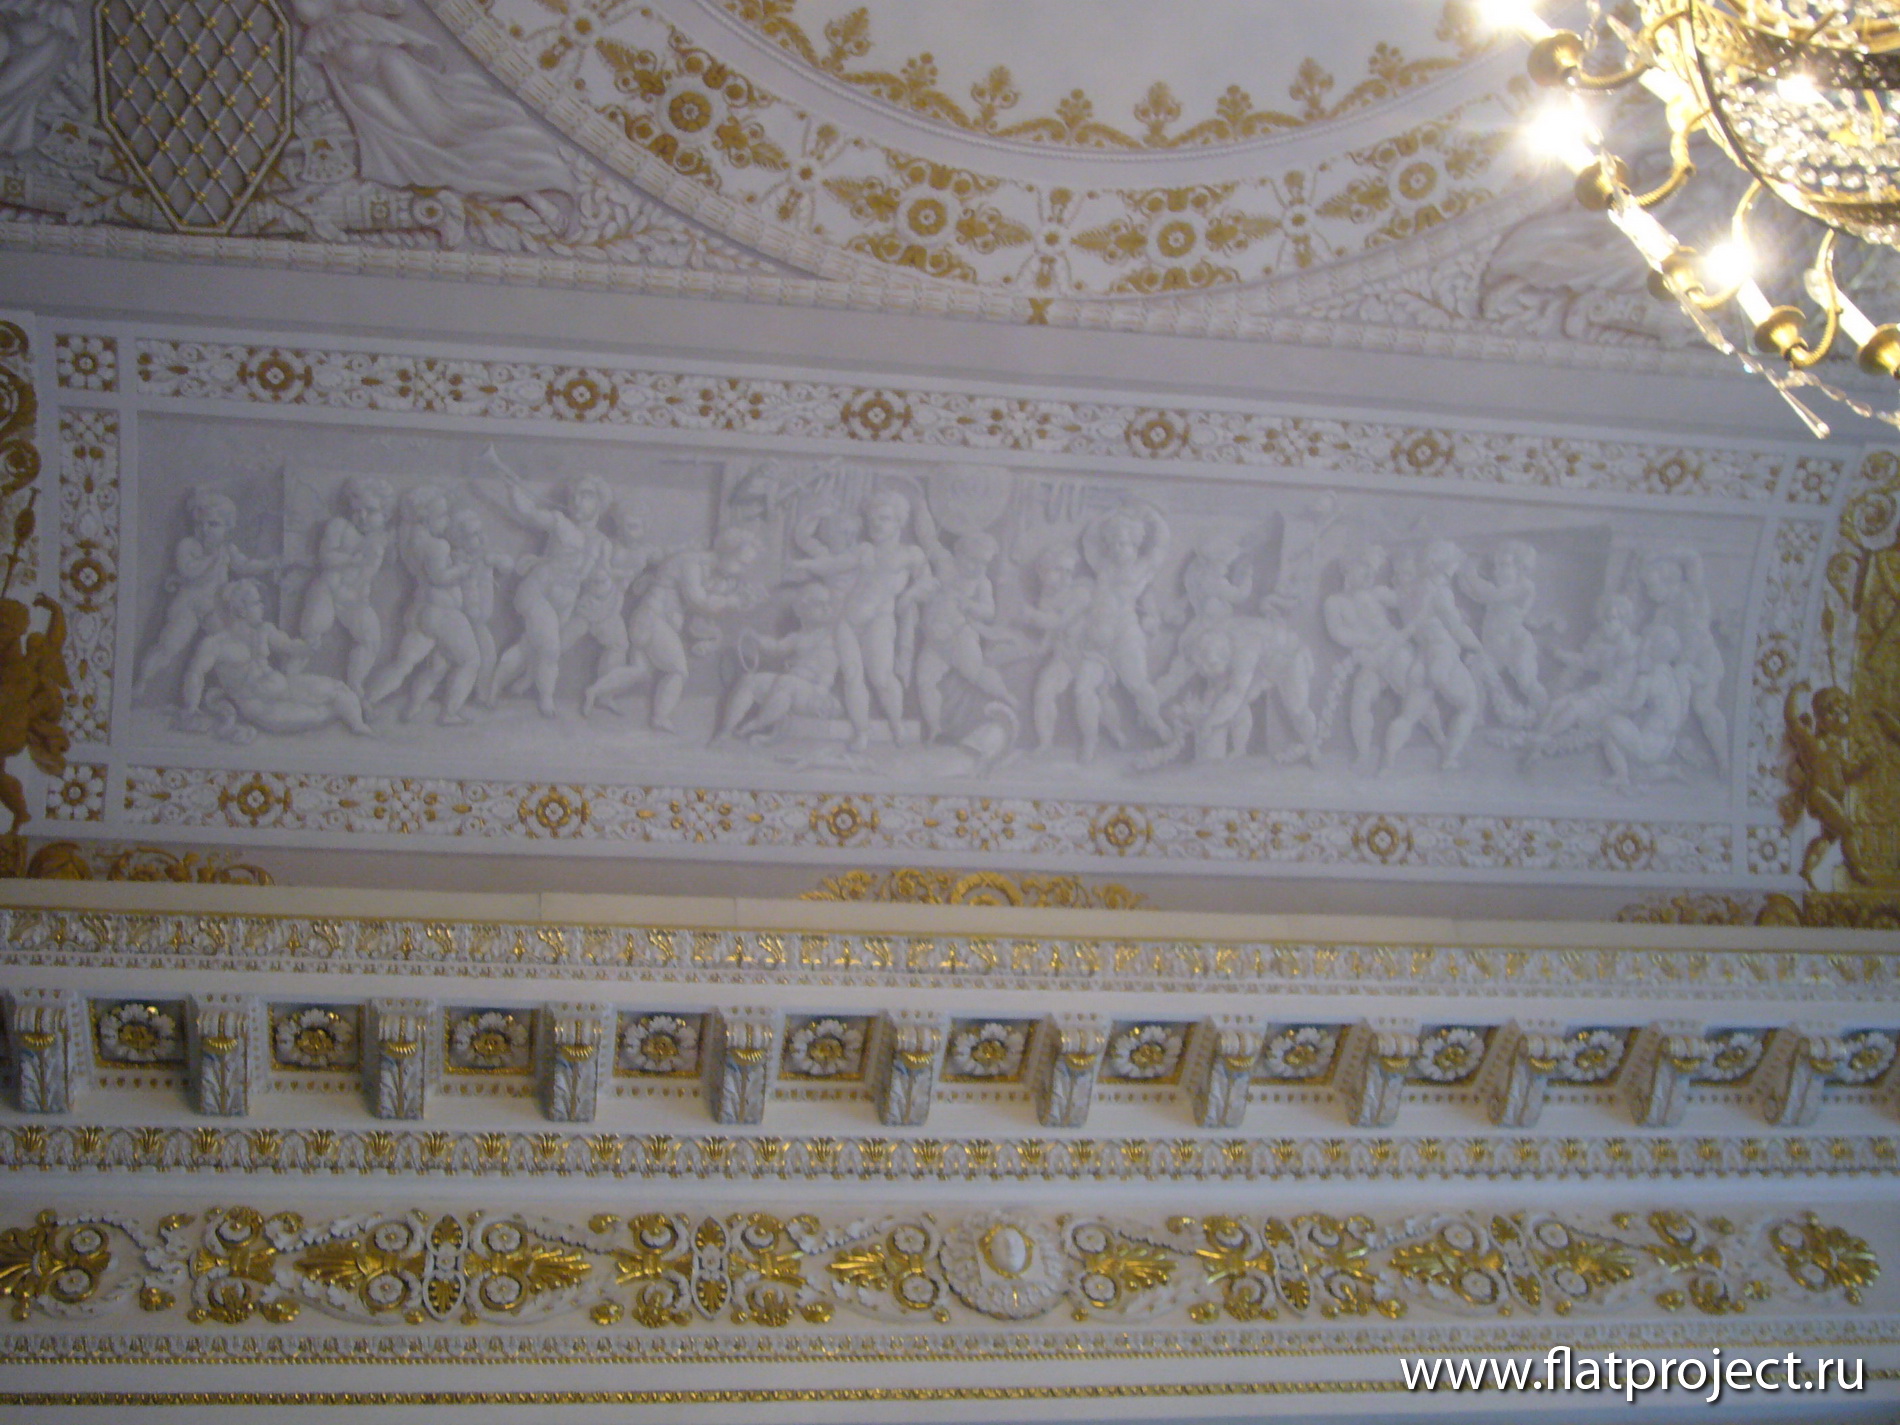 The State Russian museum interiors – photo 87